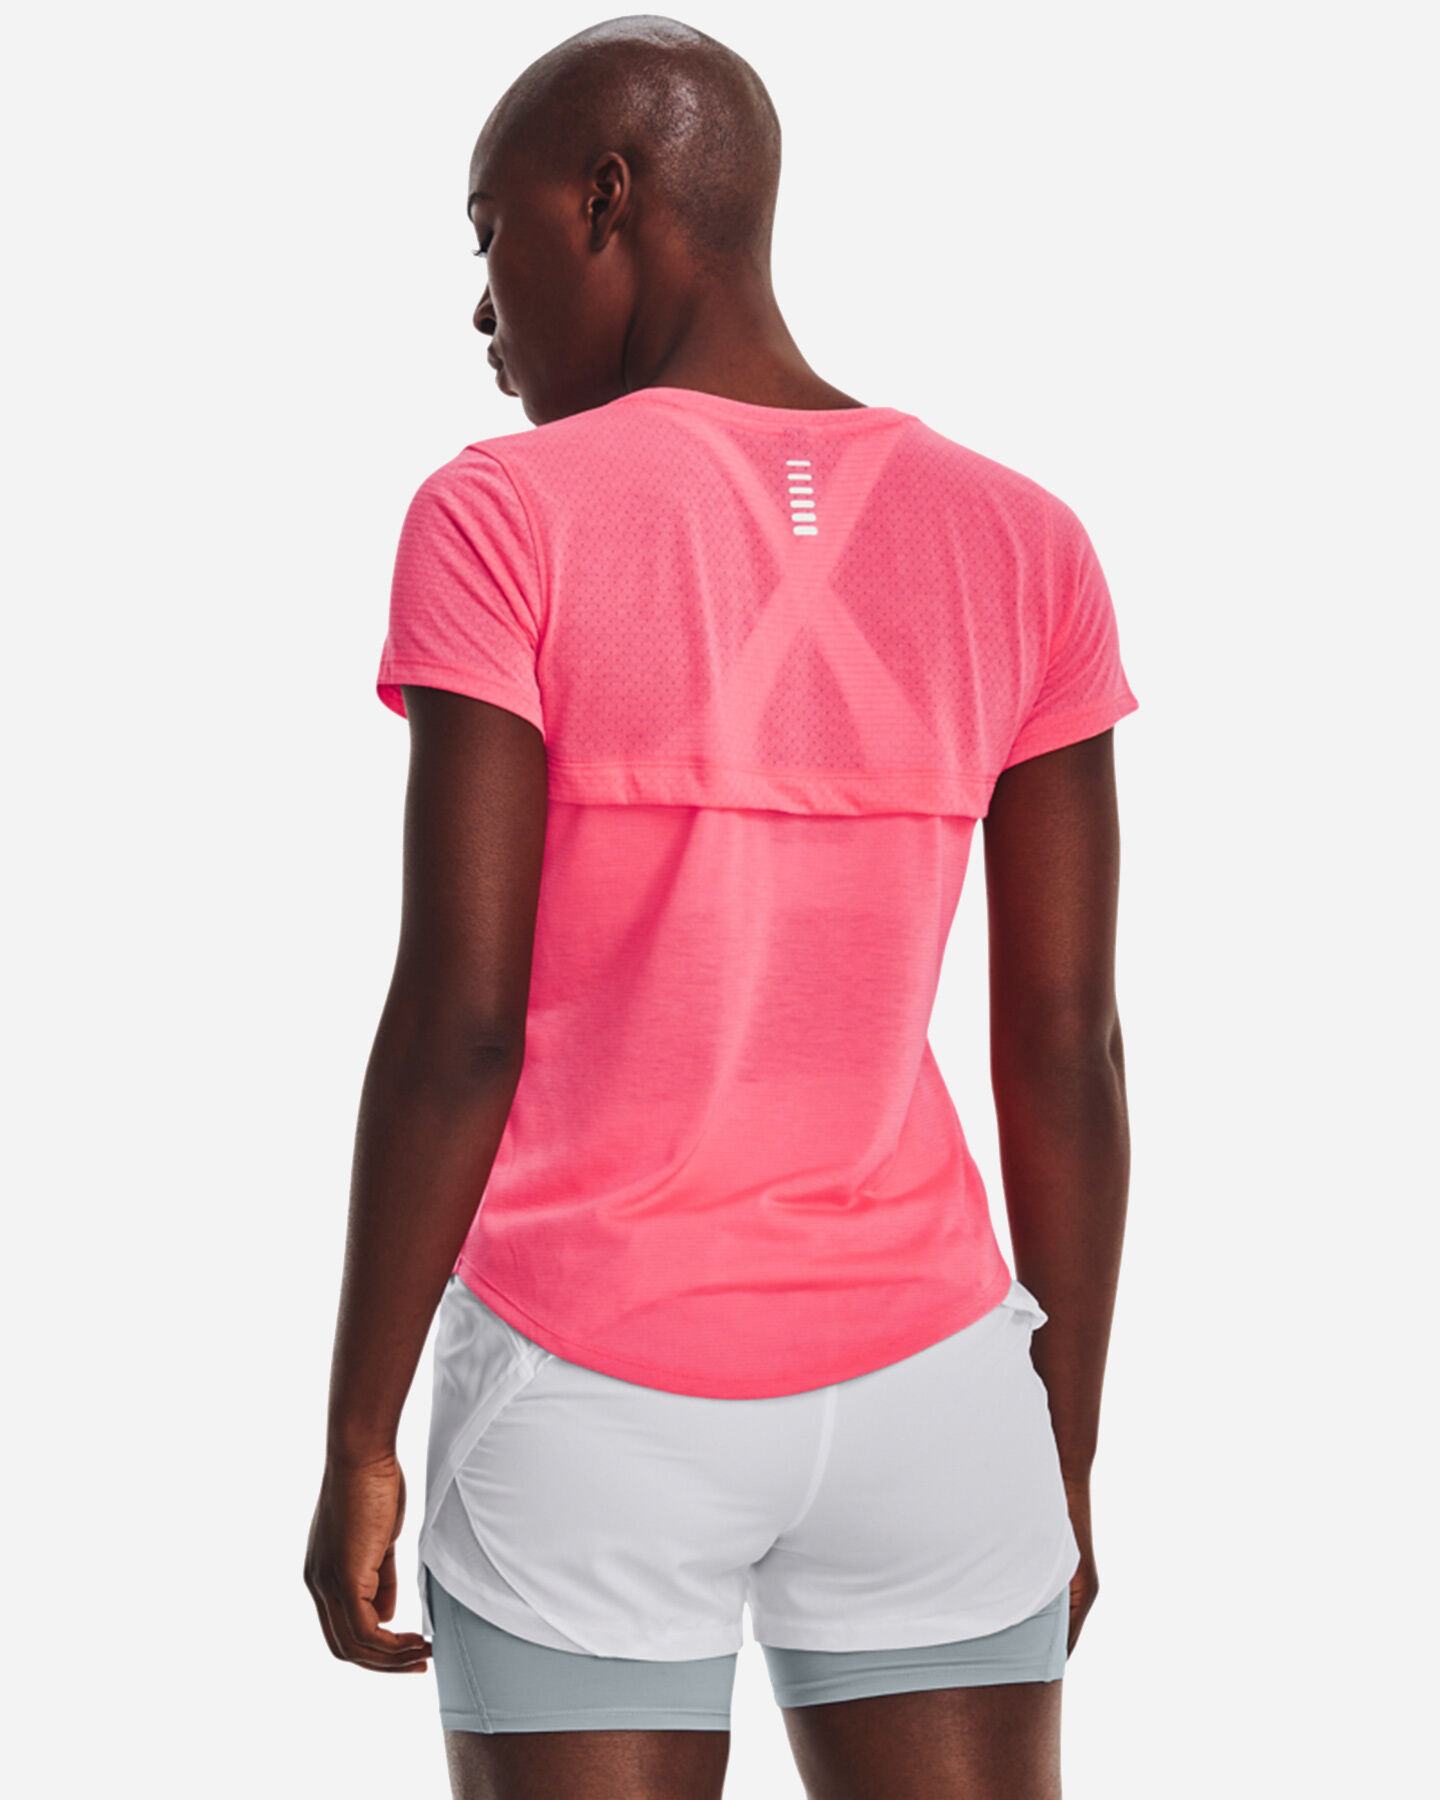  T-Shirt running UNDER ARMOUR STREAKER W S5527750|0683|MD scatto 1